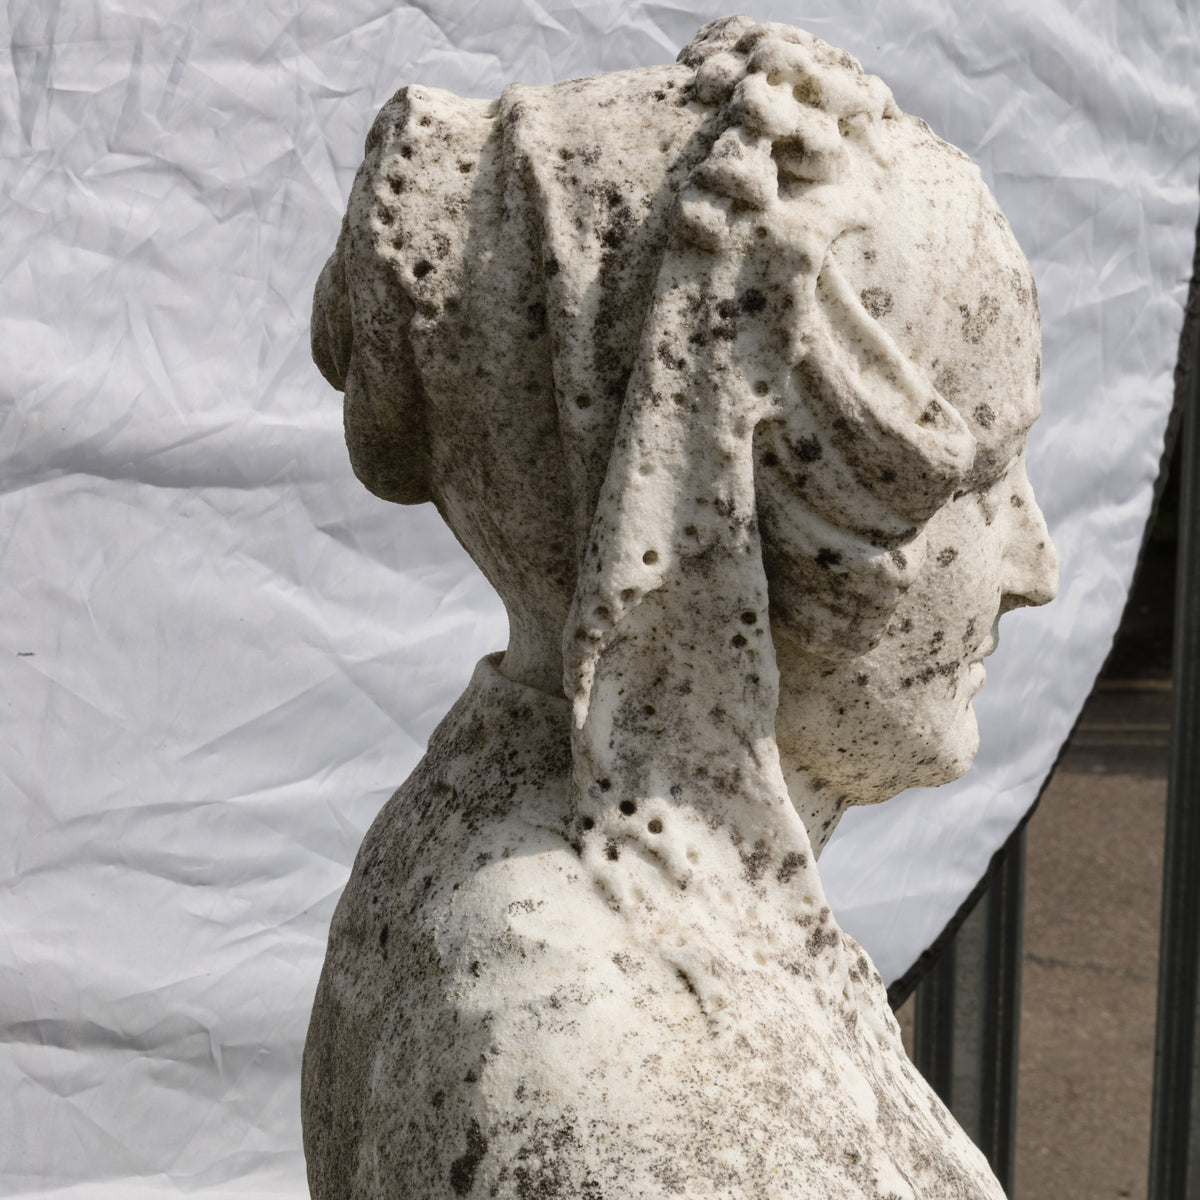 Antique Queen Victoria Bust Carved in Carrara Marble | The Architectural Forum